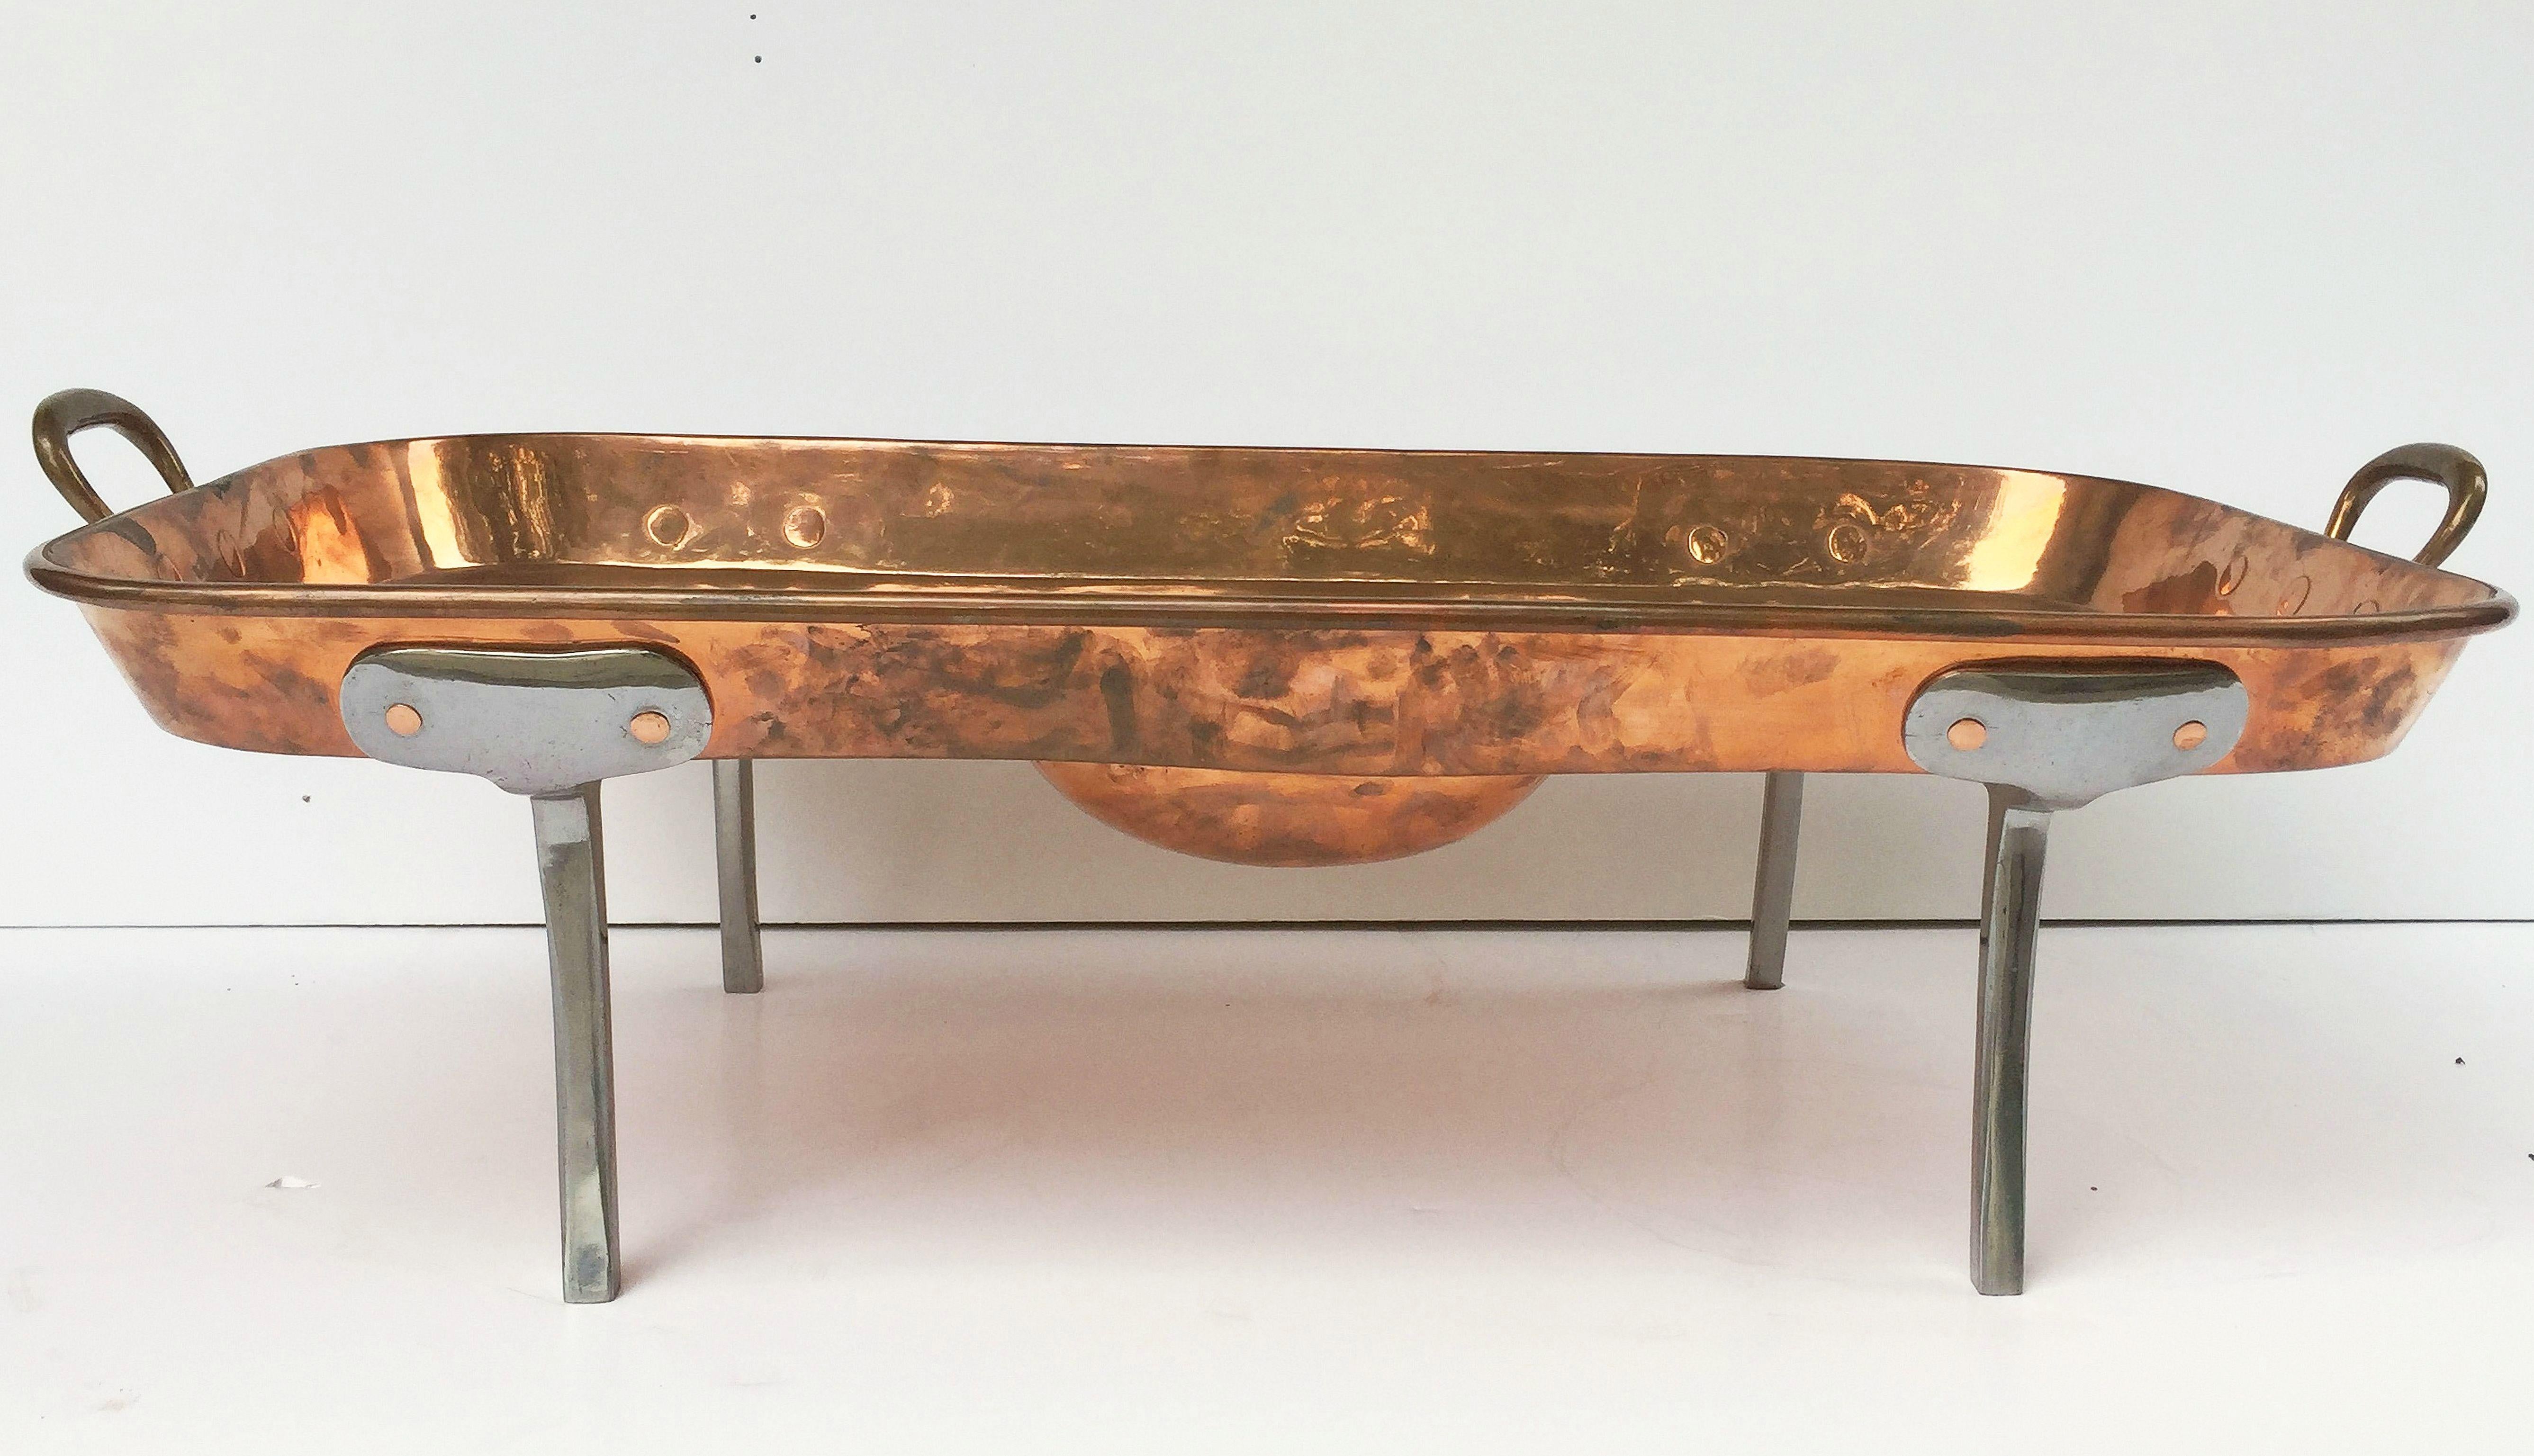 Large English Rectangular Copper Serving Tray or Platter on Steel Feet 4